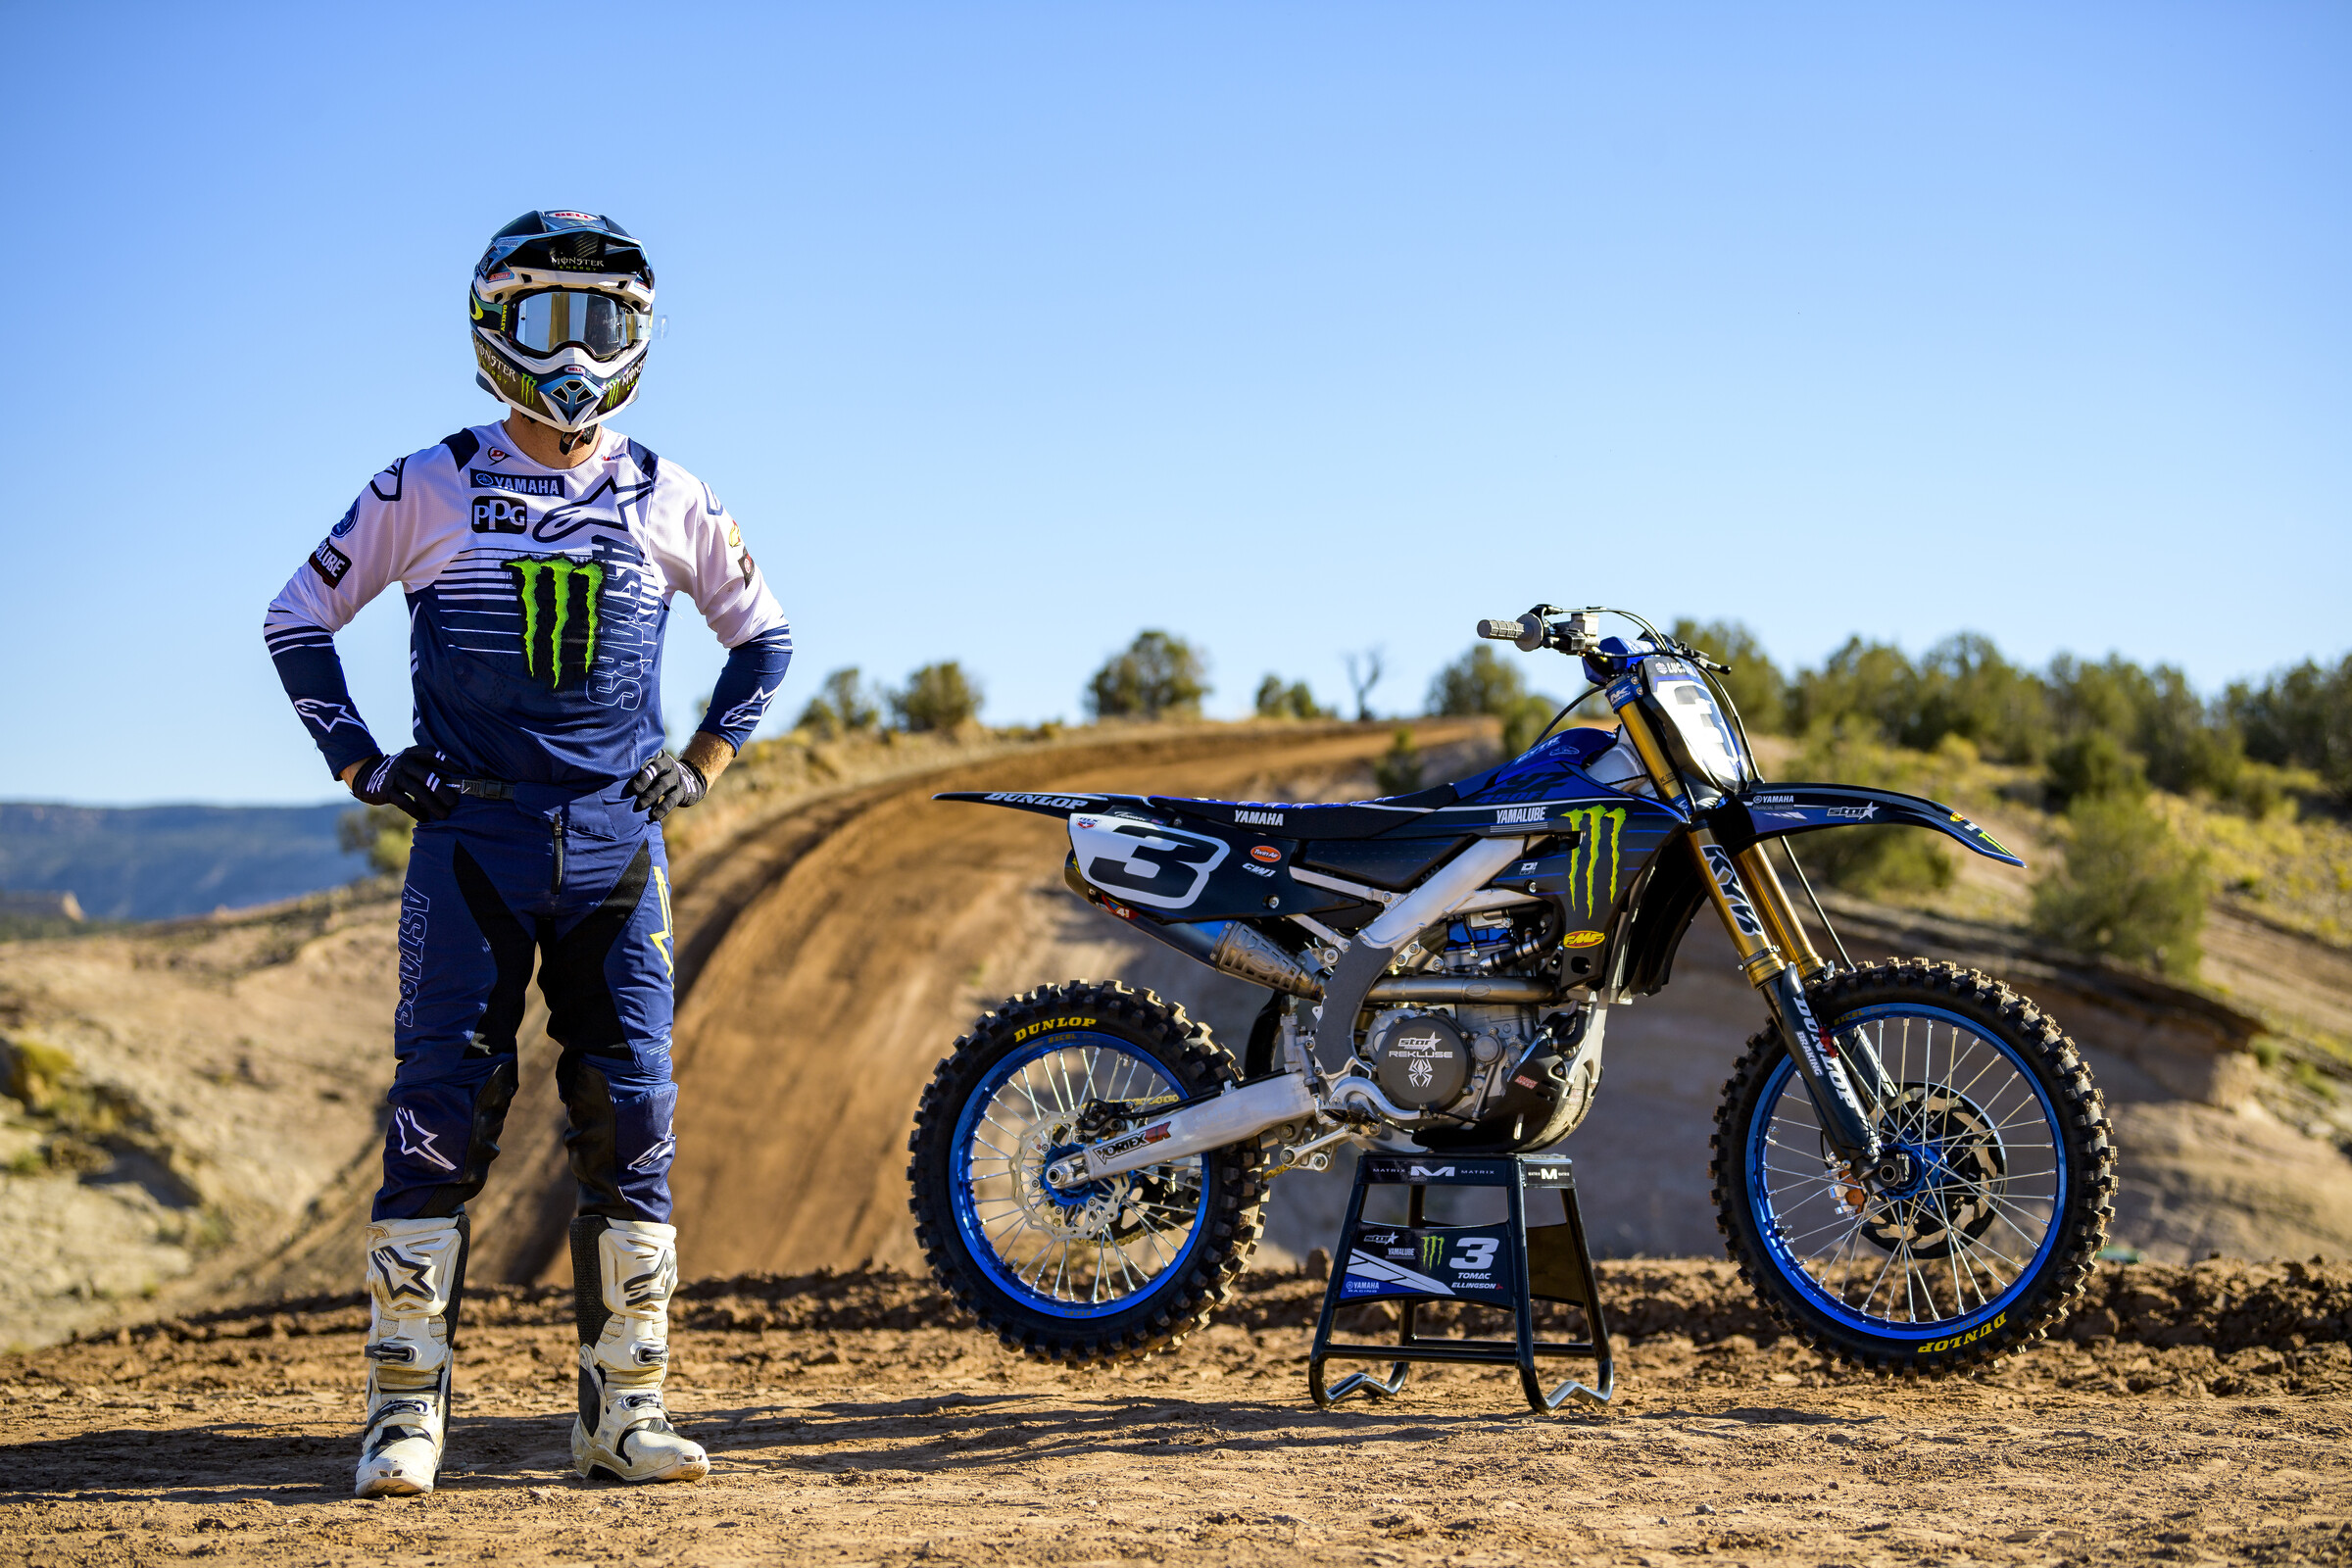 Watch: First Look at Eli Tomac on a Yamaha